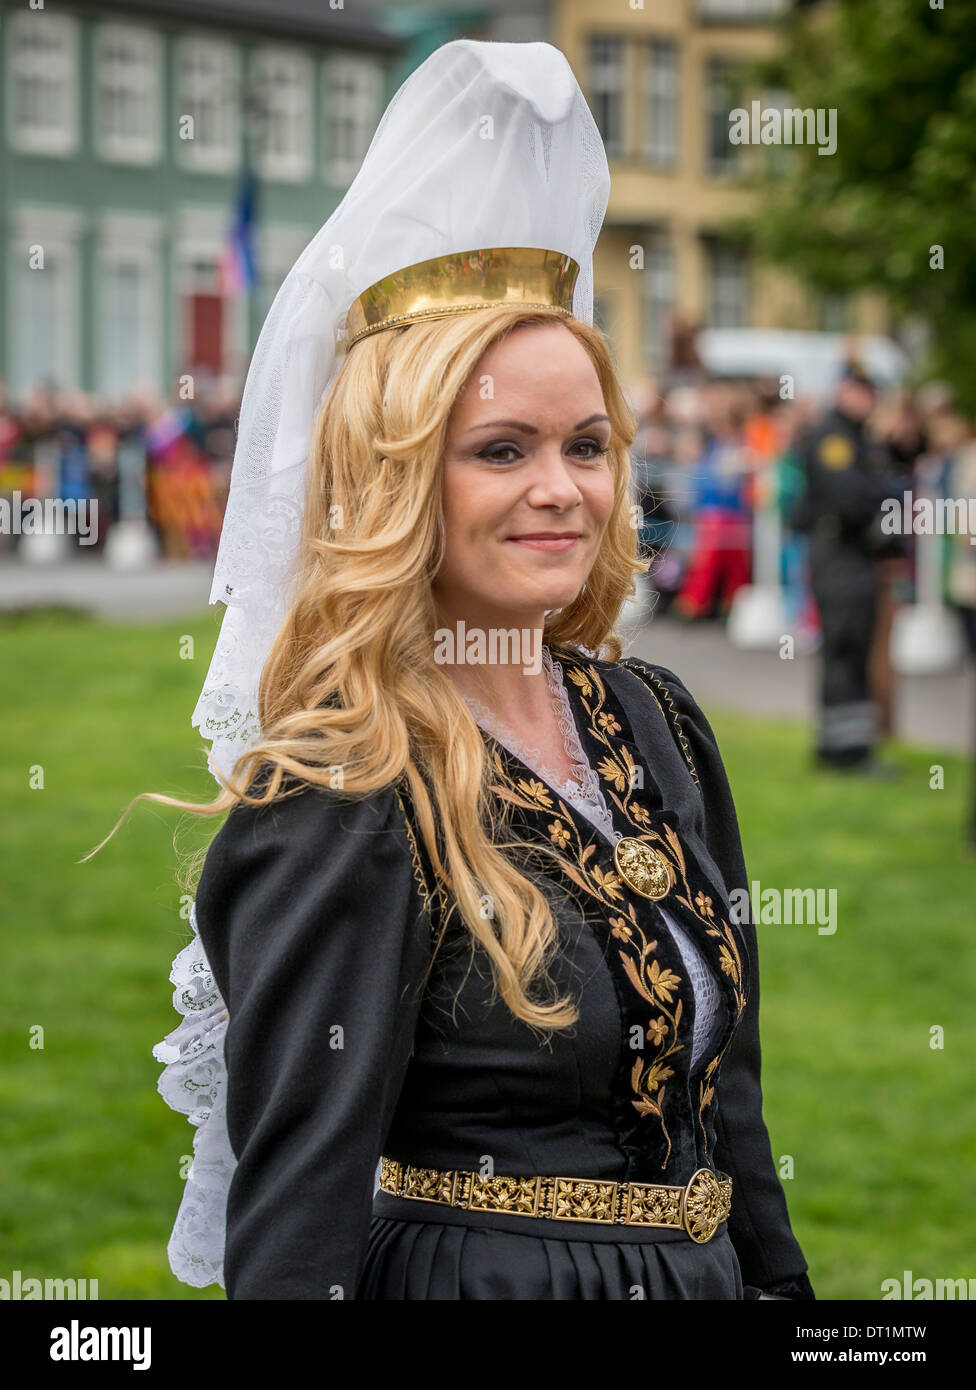 Woman in traditional Icelandic dress on June 17th, Iceland's Independence day, Reykjavik Stock Photo